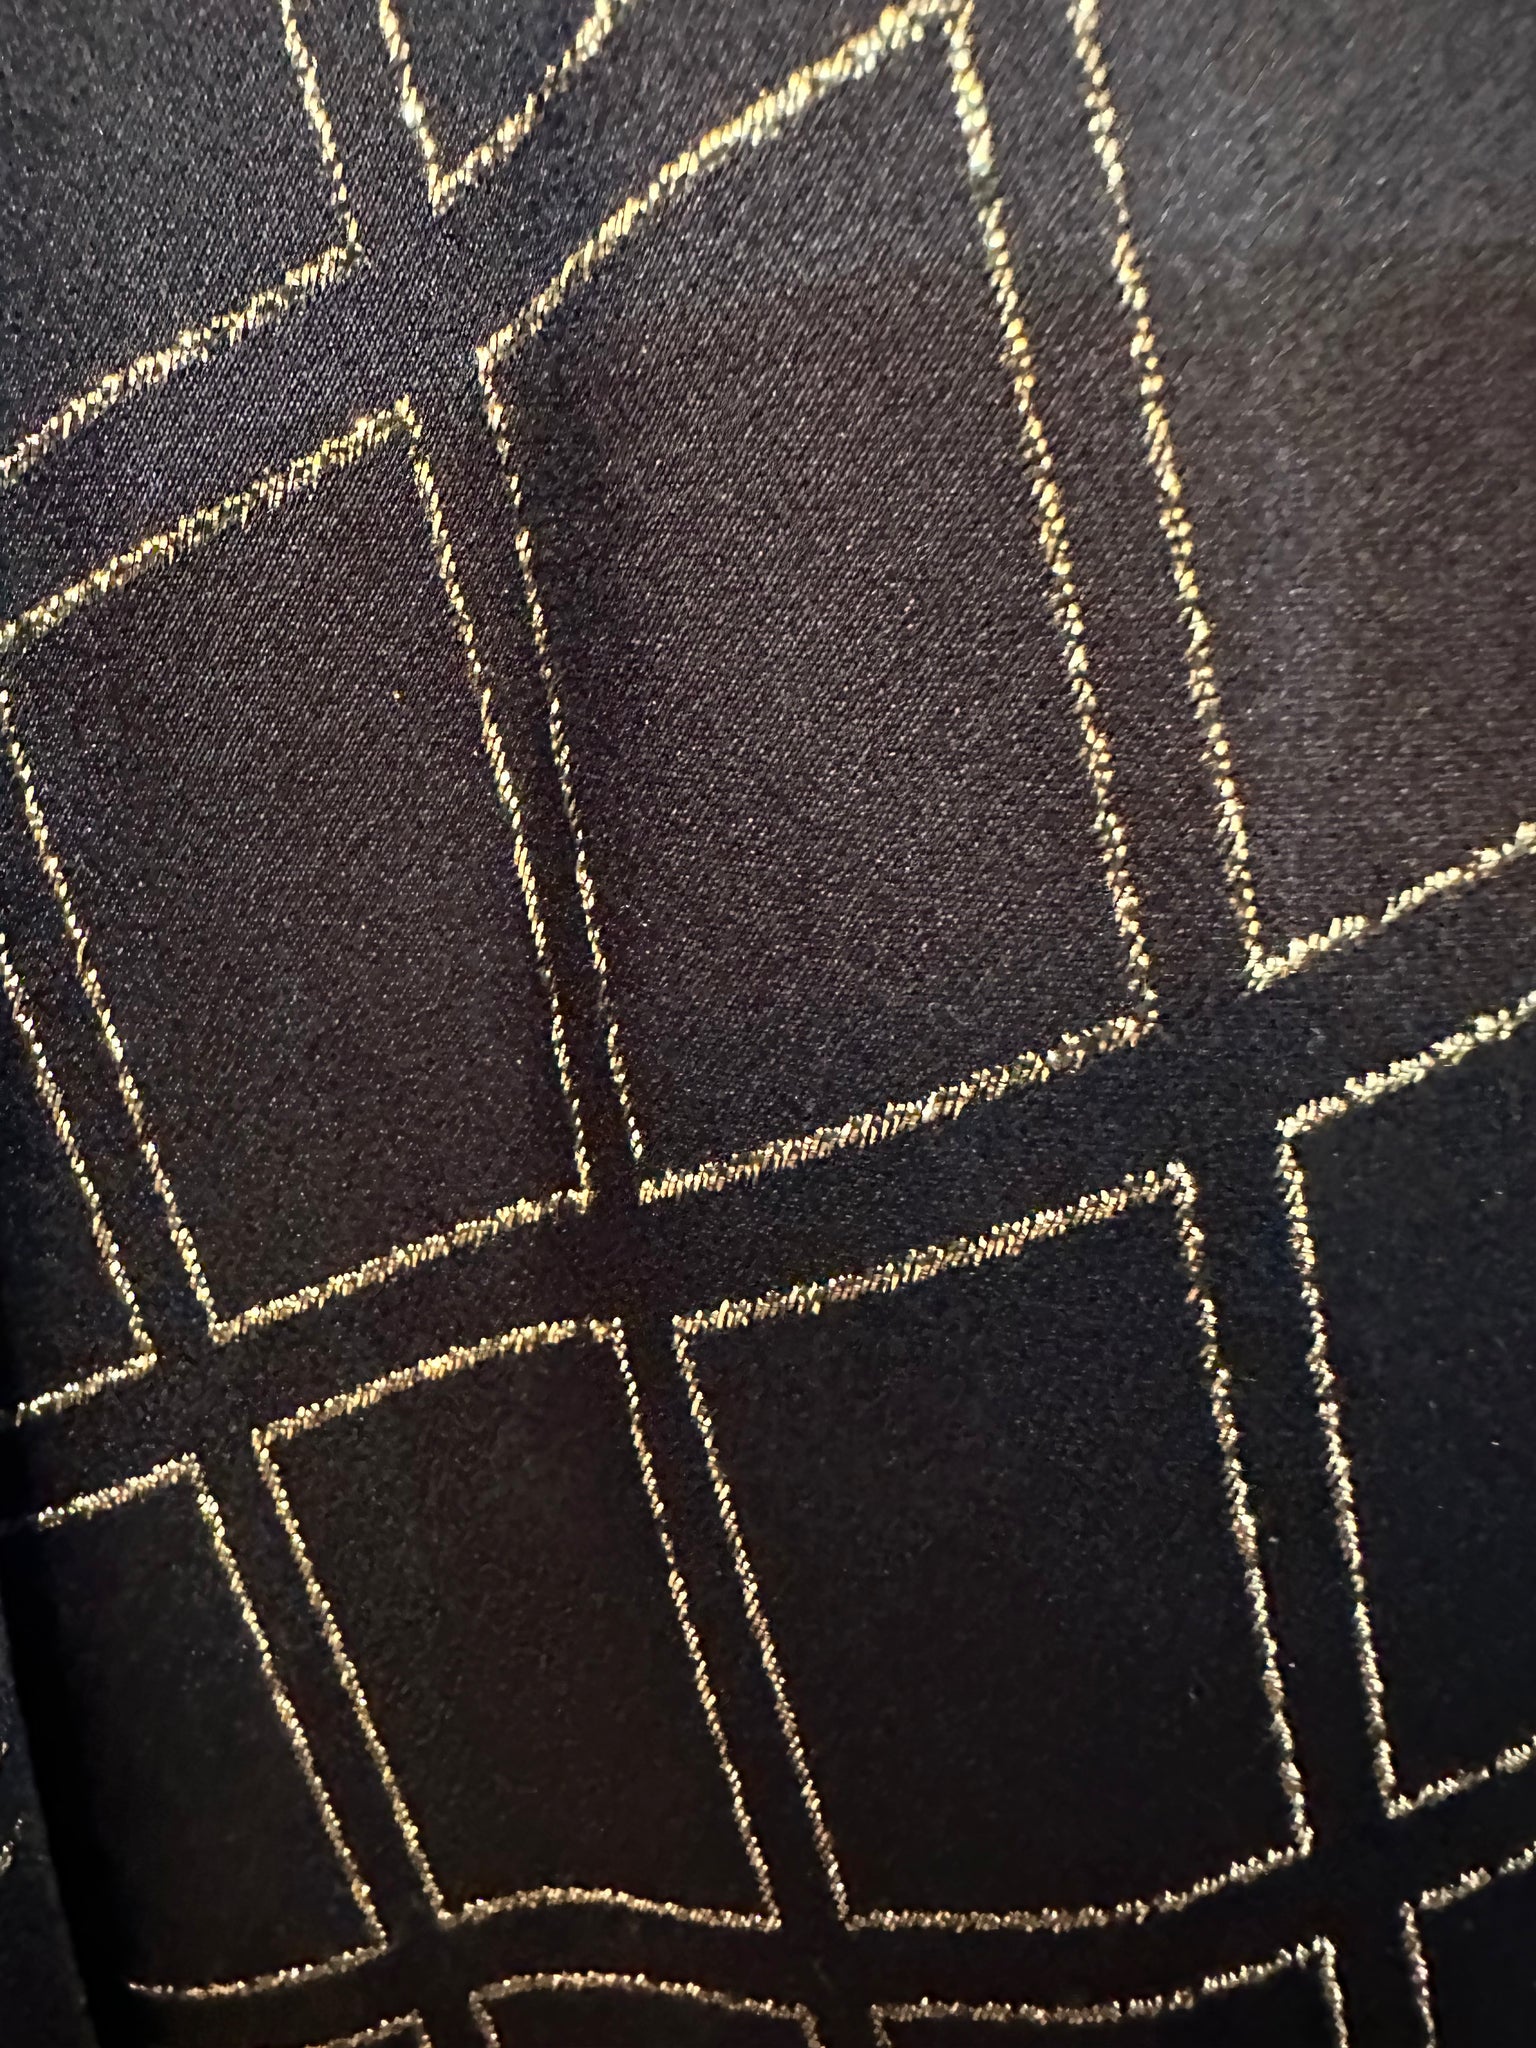  Galanos 70s Gown Black and Gold Satin with Giant Bow Detail DETAIL 5 of 6 